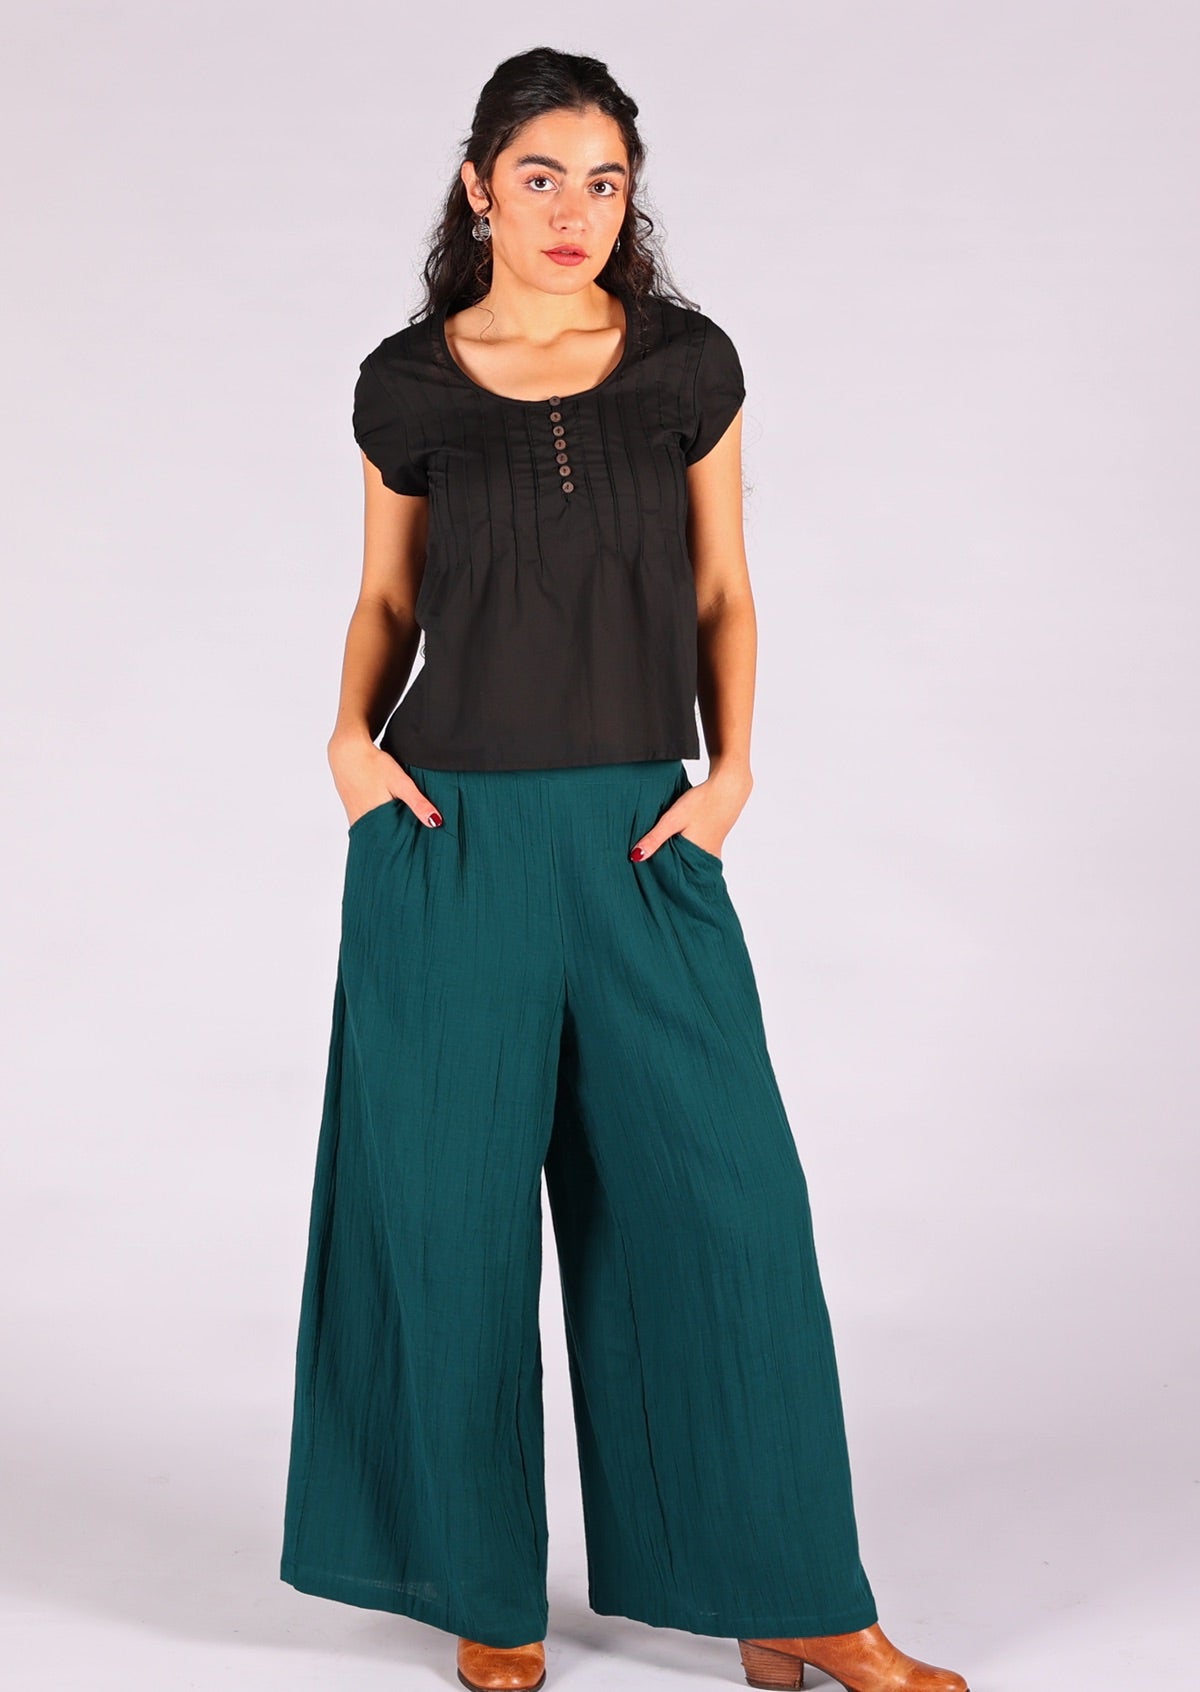 Super comfortable double cotton pants with wide leg and pockets